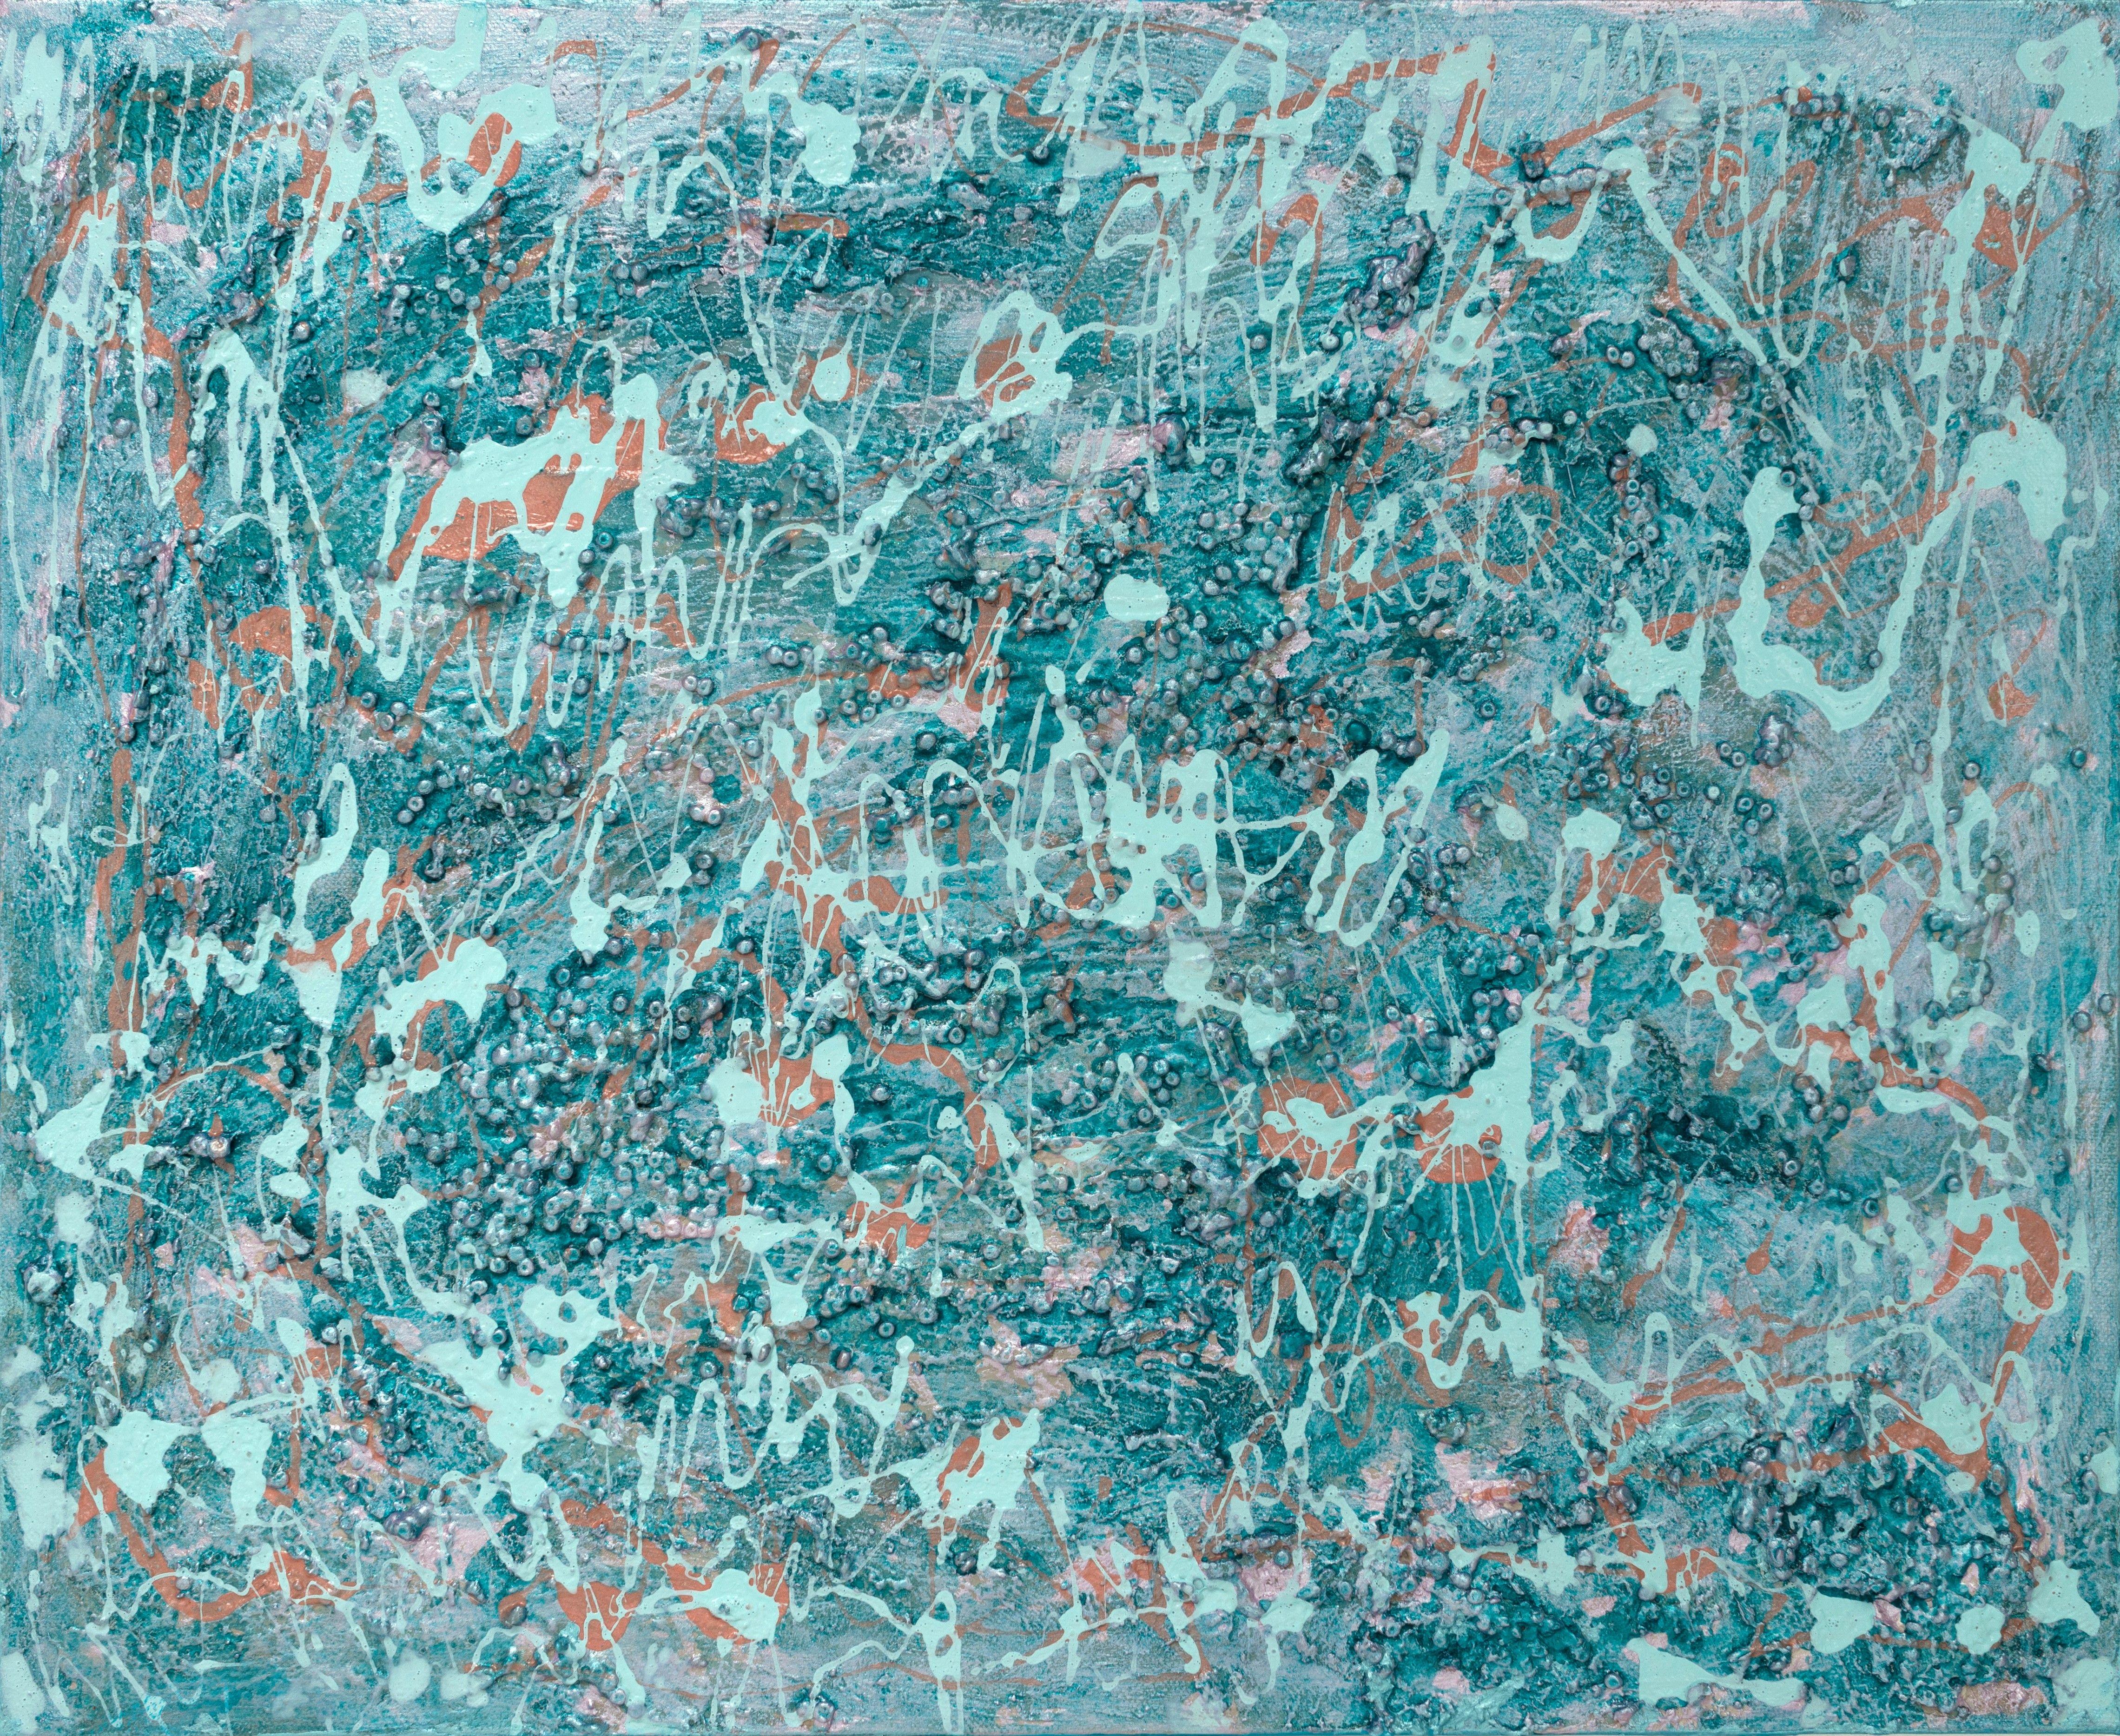 Pamela Rys Abstract Painting - Wrinkle in Space-Time, Painting, Acrylic on Canvas